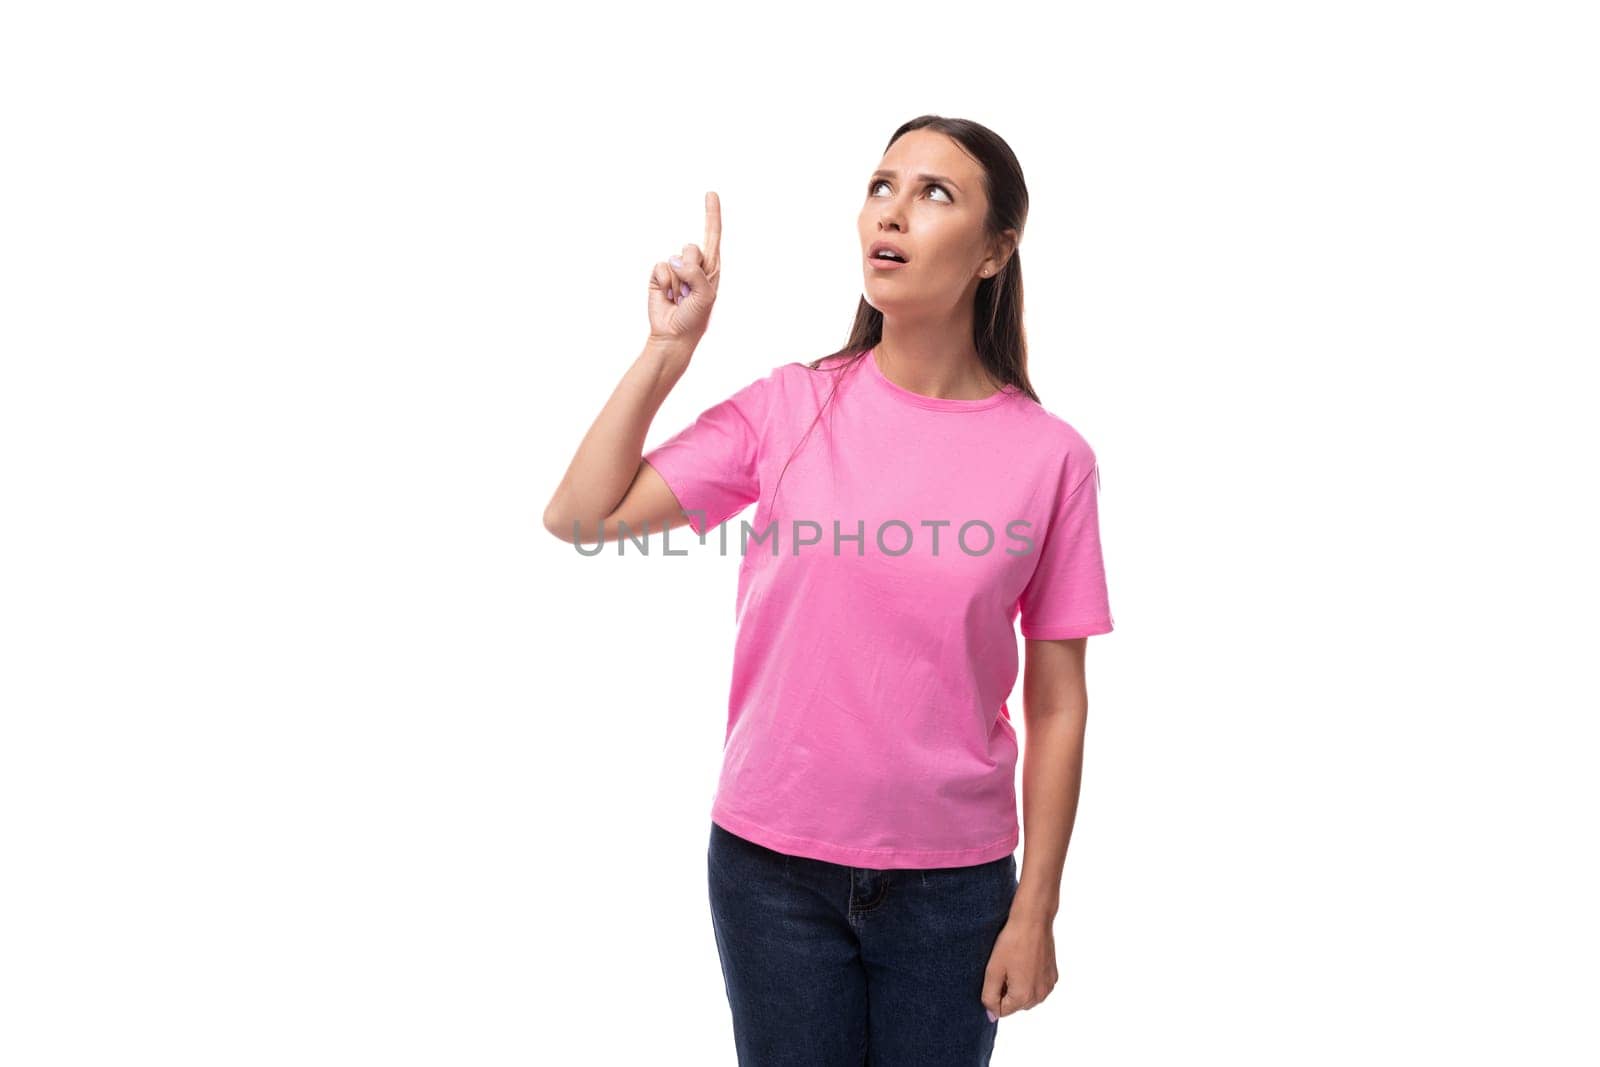 young beautiful model woman with straight black hair dressed in a pink t-shirt points her hand up.